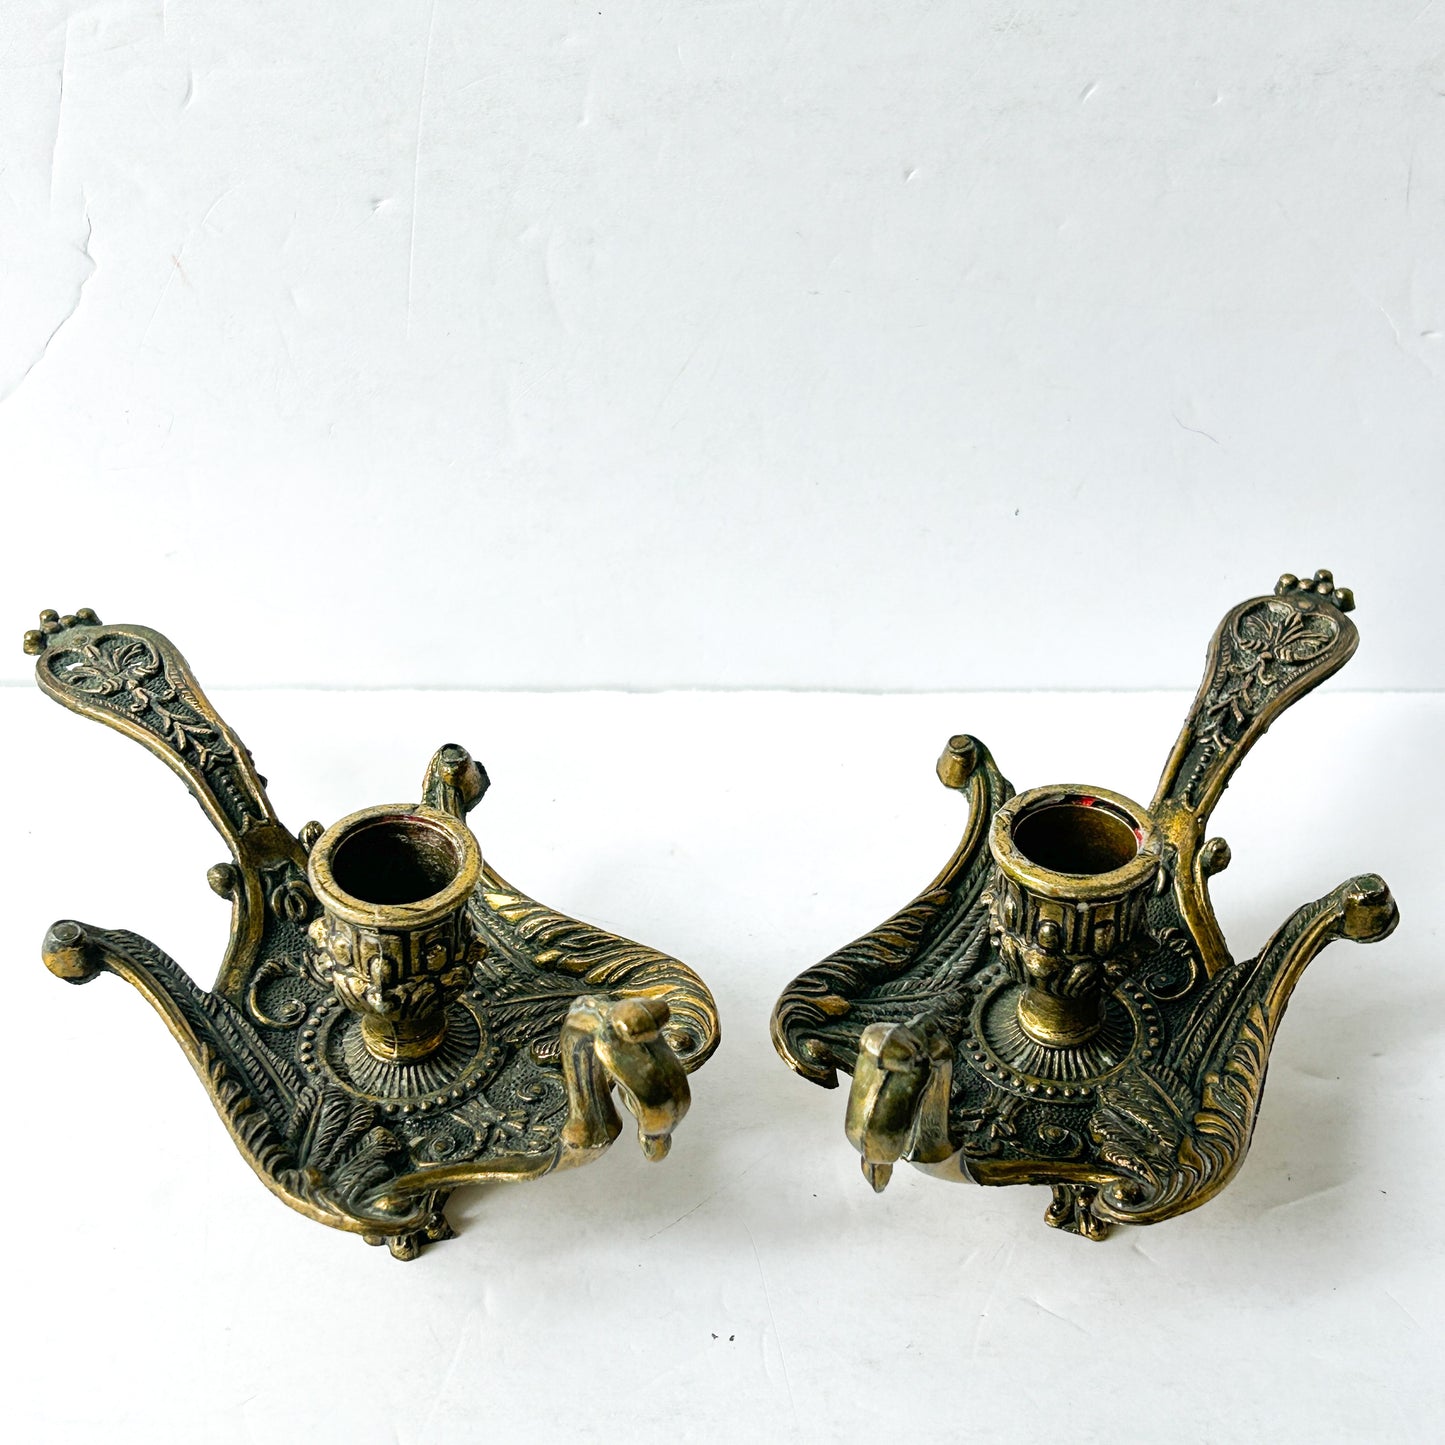 Vintage brass tone peacock candle holders, Set of 2, Rococo Style, Made in Italy